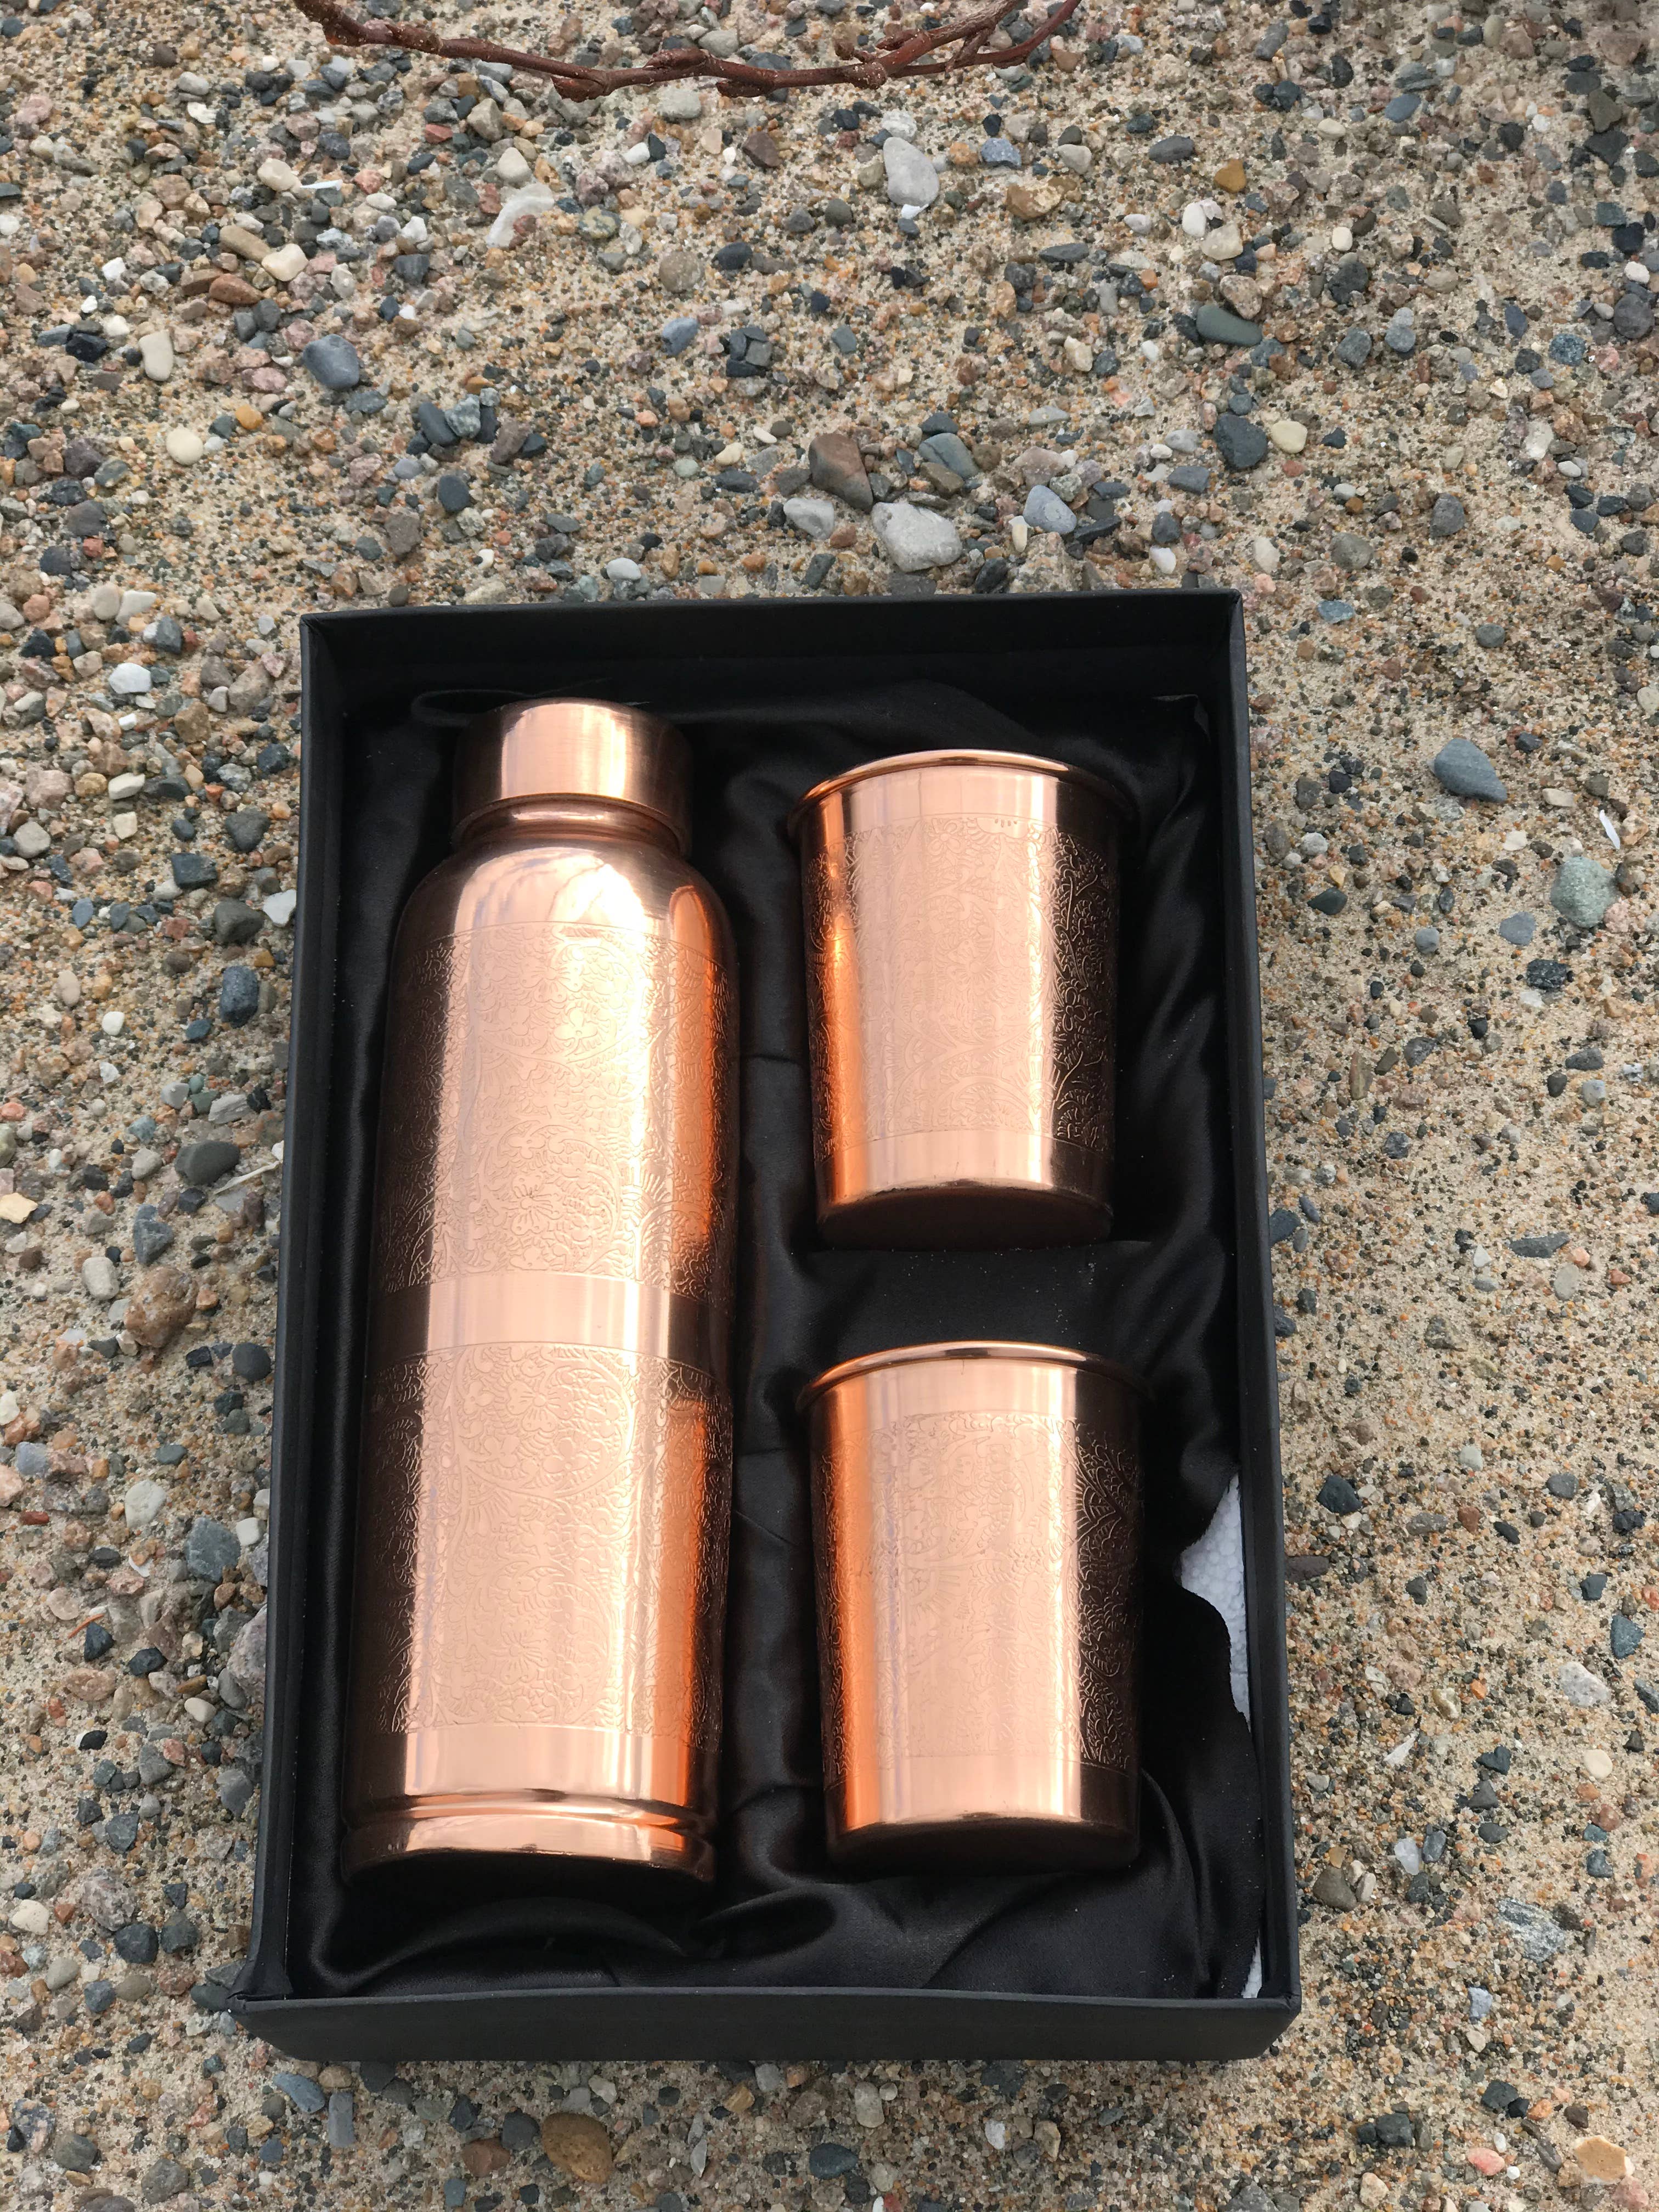 J&V TEXTILES Moscow Mule Copper Mugs - Gift Set of 4, 100% Solid  Handcrafted Copper Cups - 2 Ounce Food Safe Hammered Mug For Mules -  Walmart.com